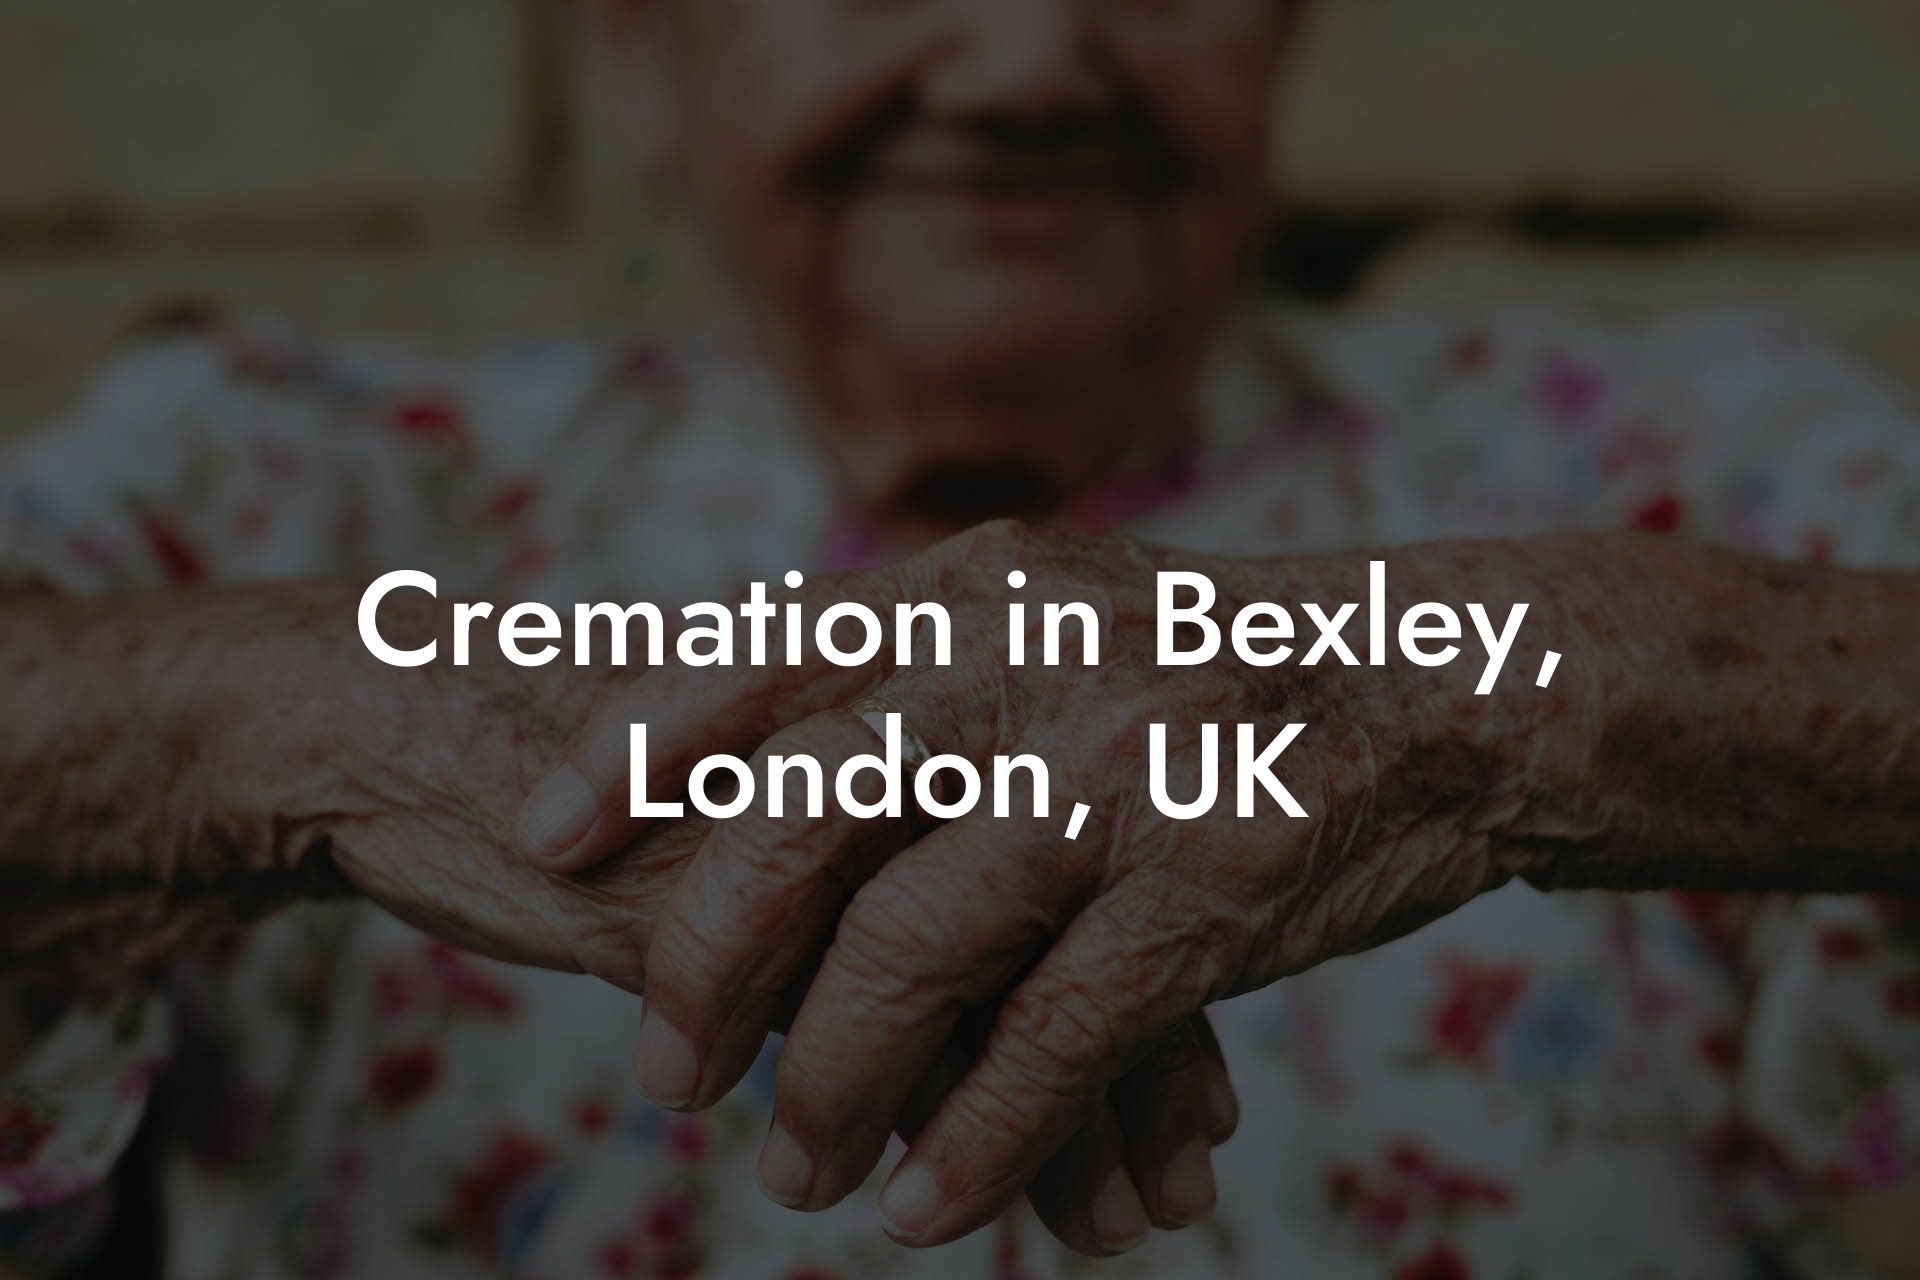 Cremation in Bexley, London, UK